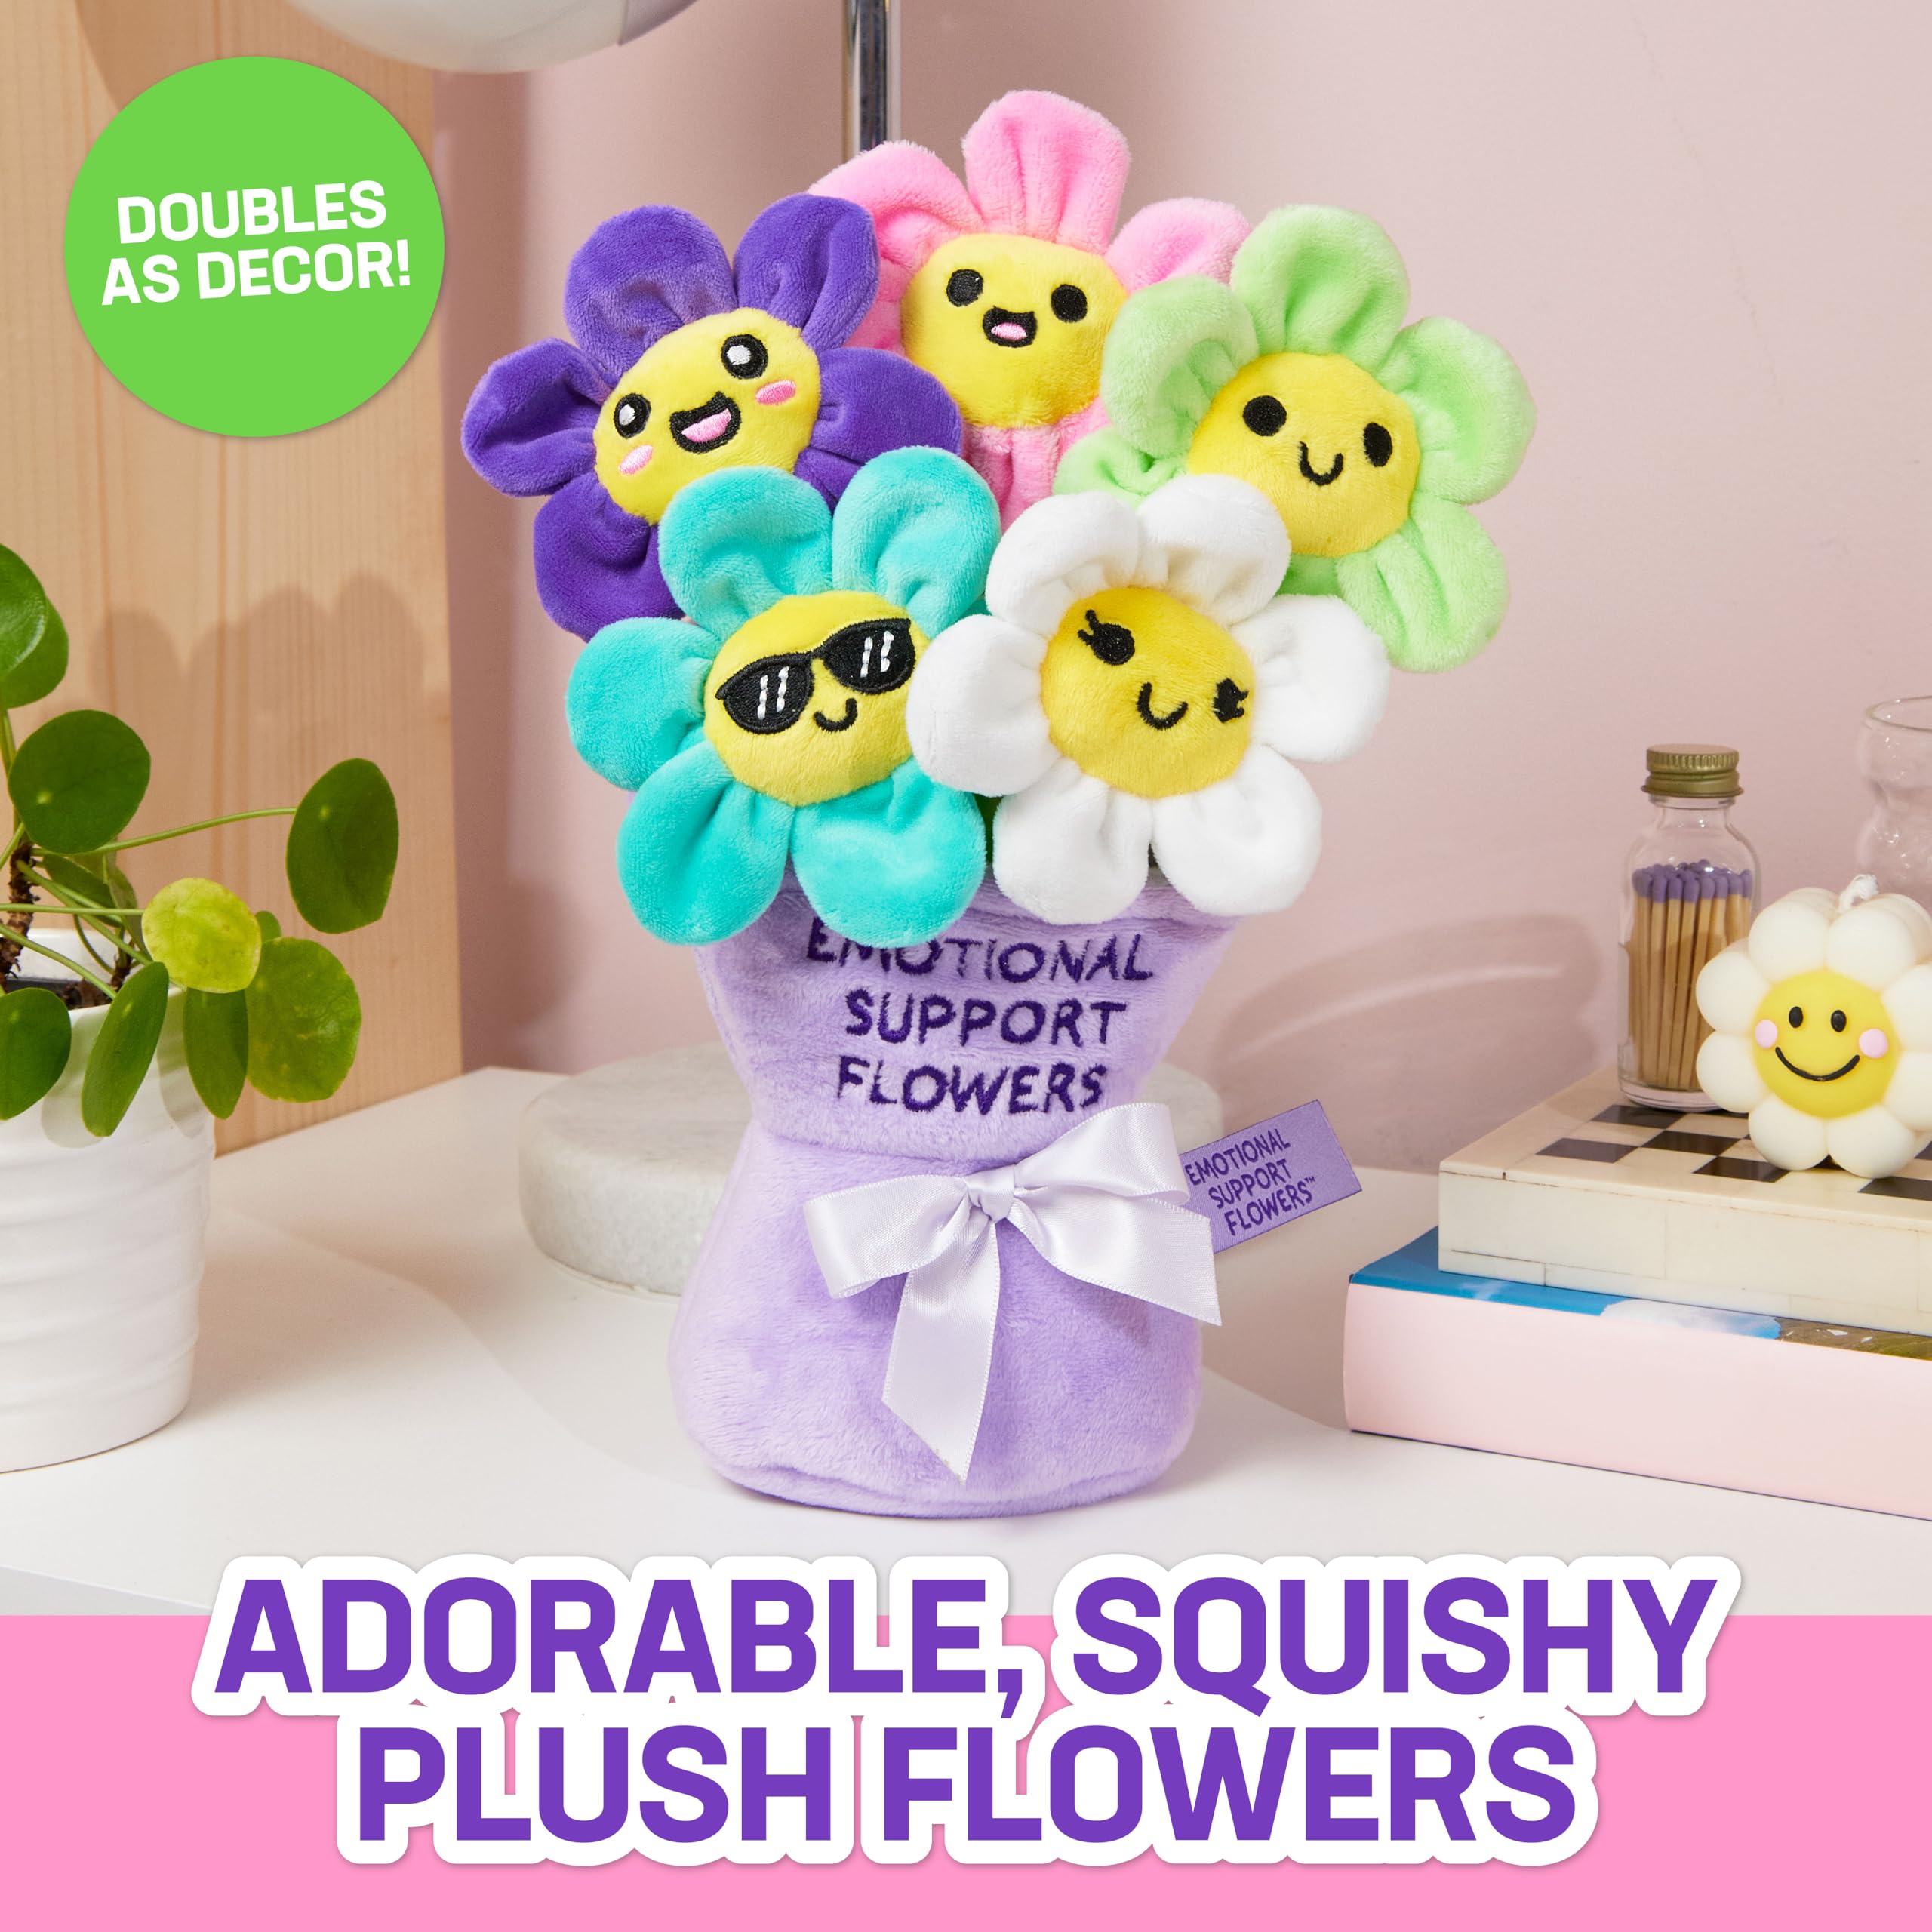 What Do You Meme? Emotional Support Flowers - Valentine's Day Gifts for Her, Gift for Mom - Plush Flowers, Flower Plushies